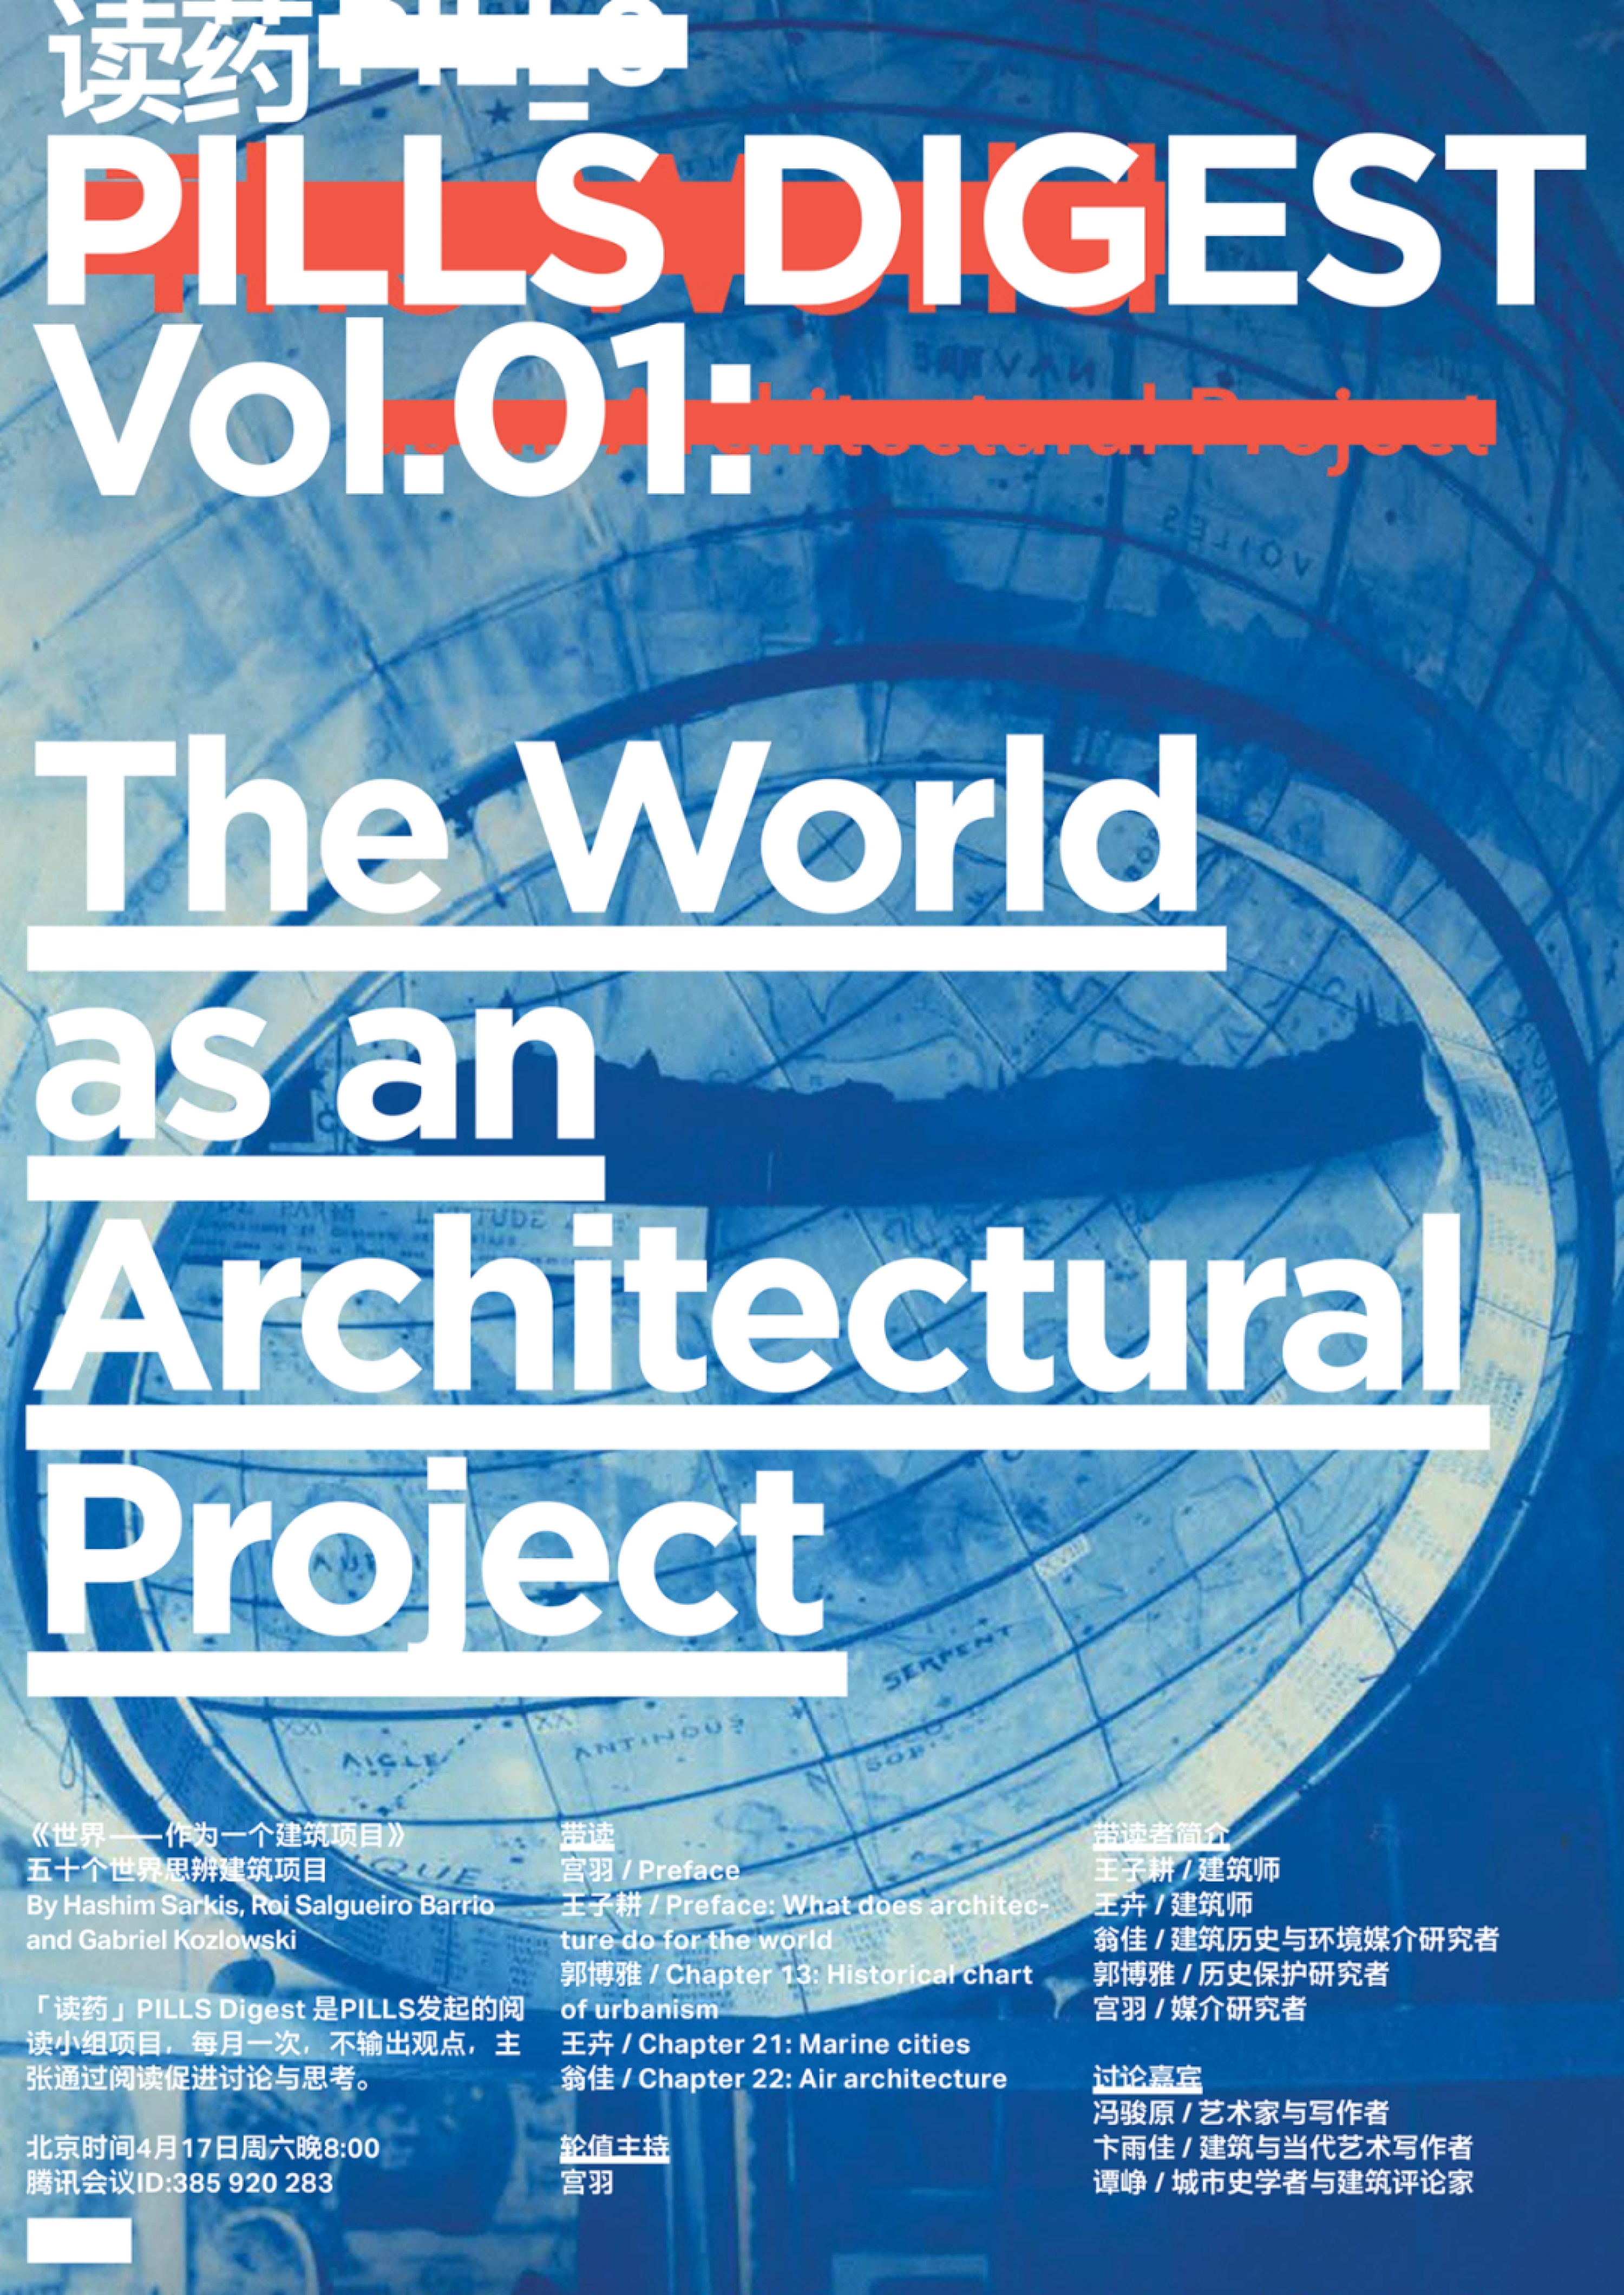 PILLS Held a Reading Activity PILLS Digest Vol.01 “The World: As an Architectural Project"